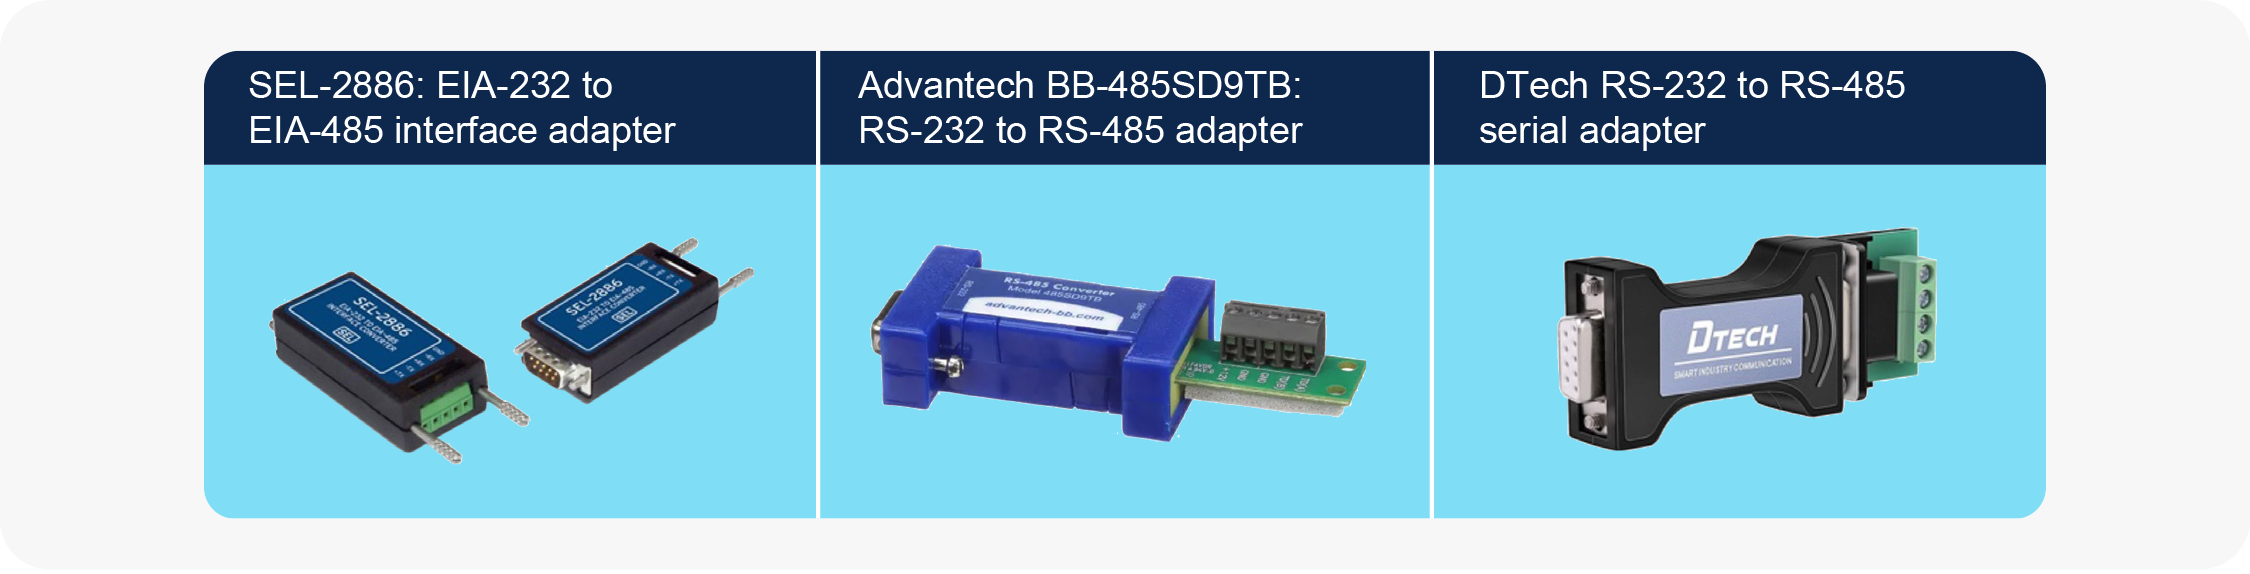 RS-232 to RS-485 adapters